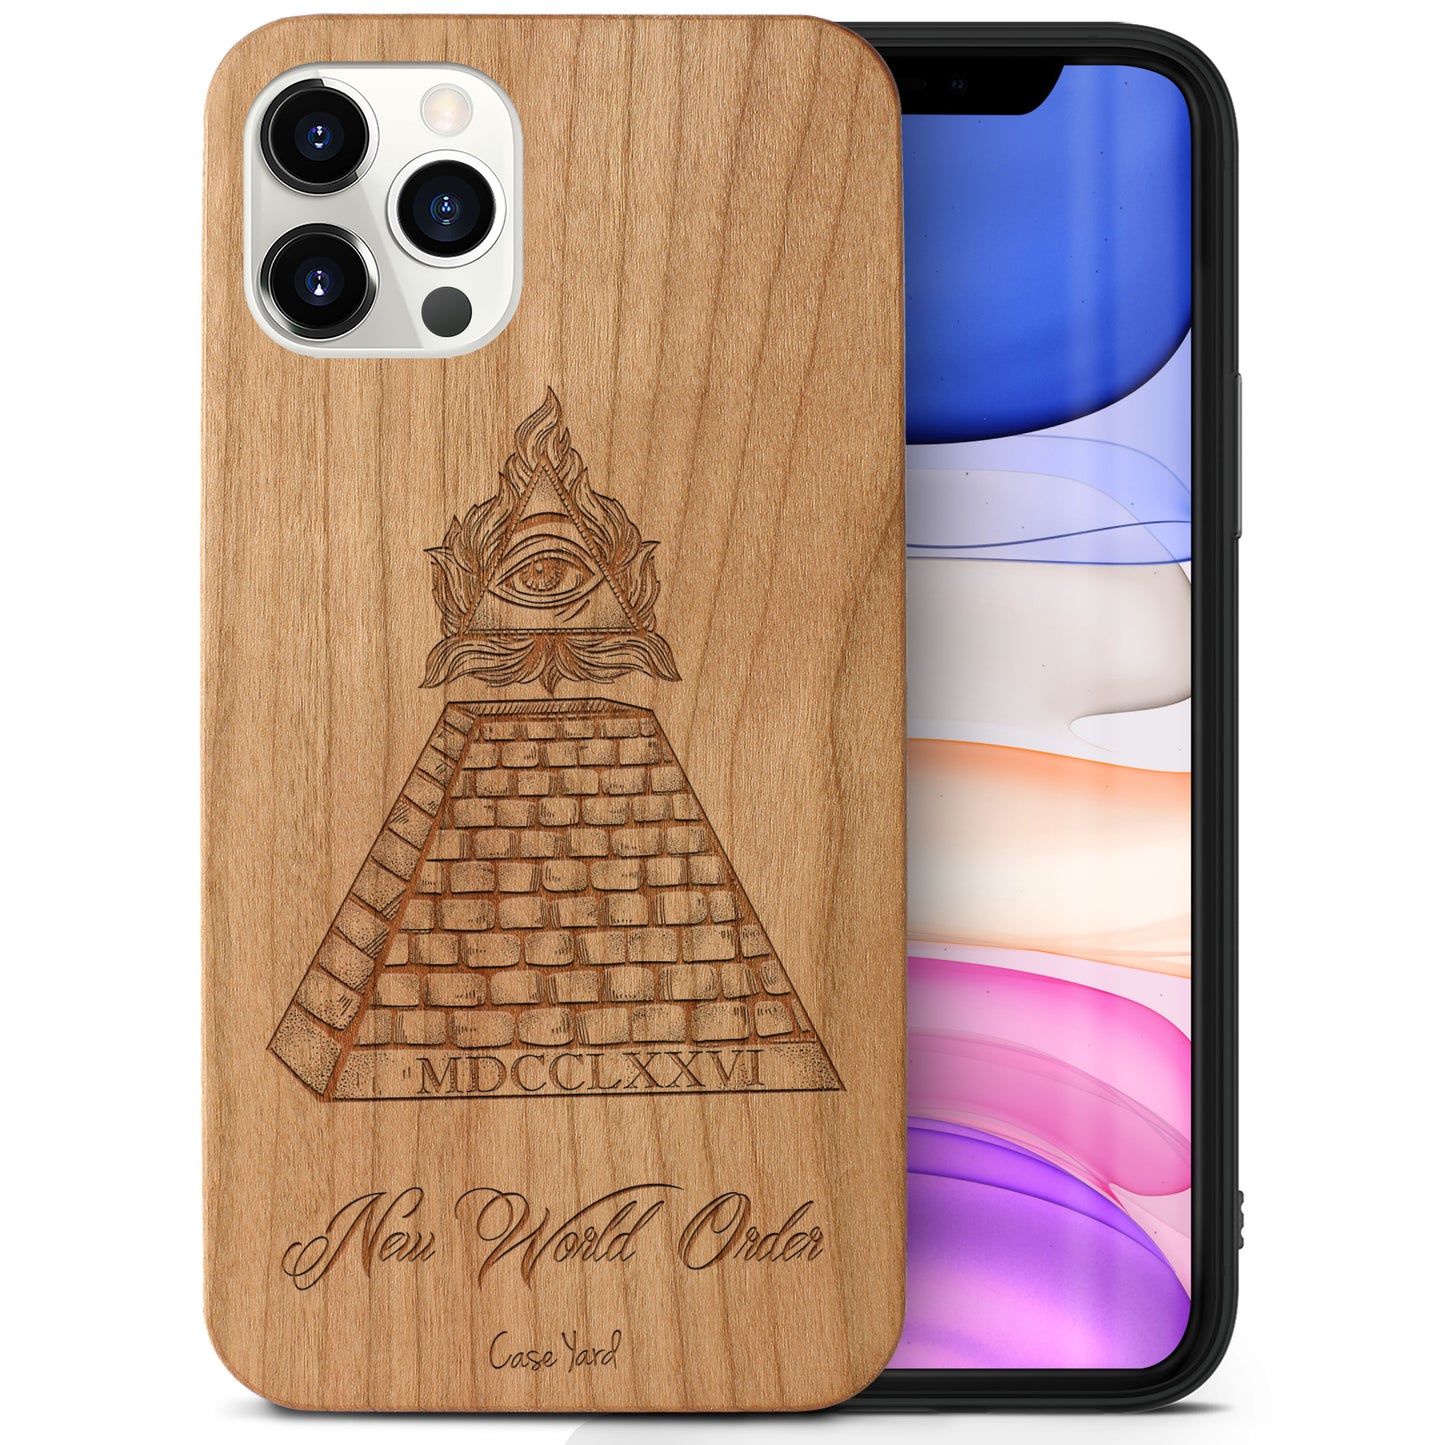 Wooden Cell Phone Case Cover, Laser Engraved case for iPhone & Samsung phone New World Order Design